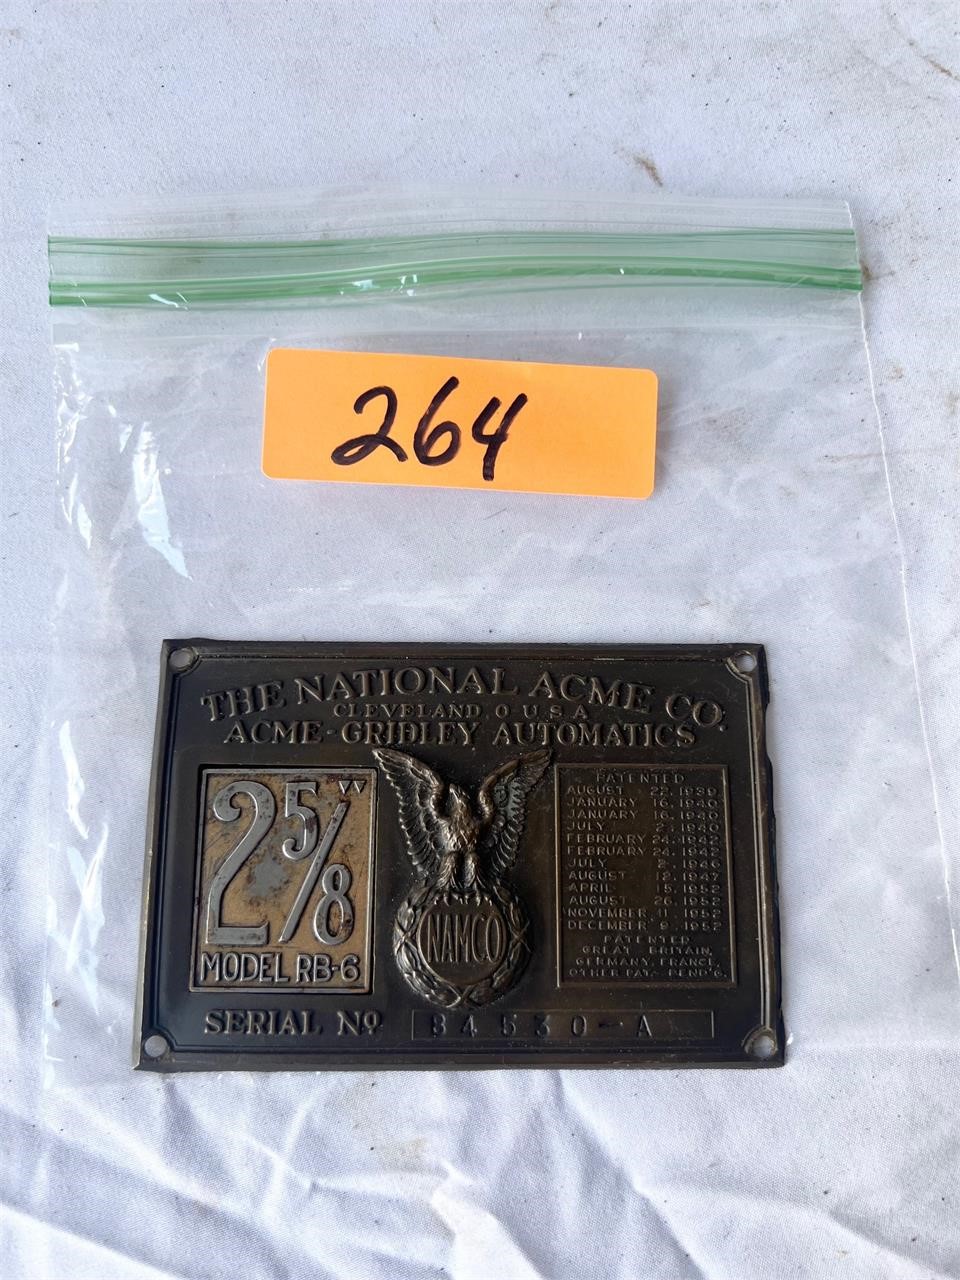 The National Acme Co. Brass Plate